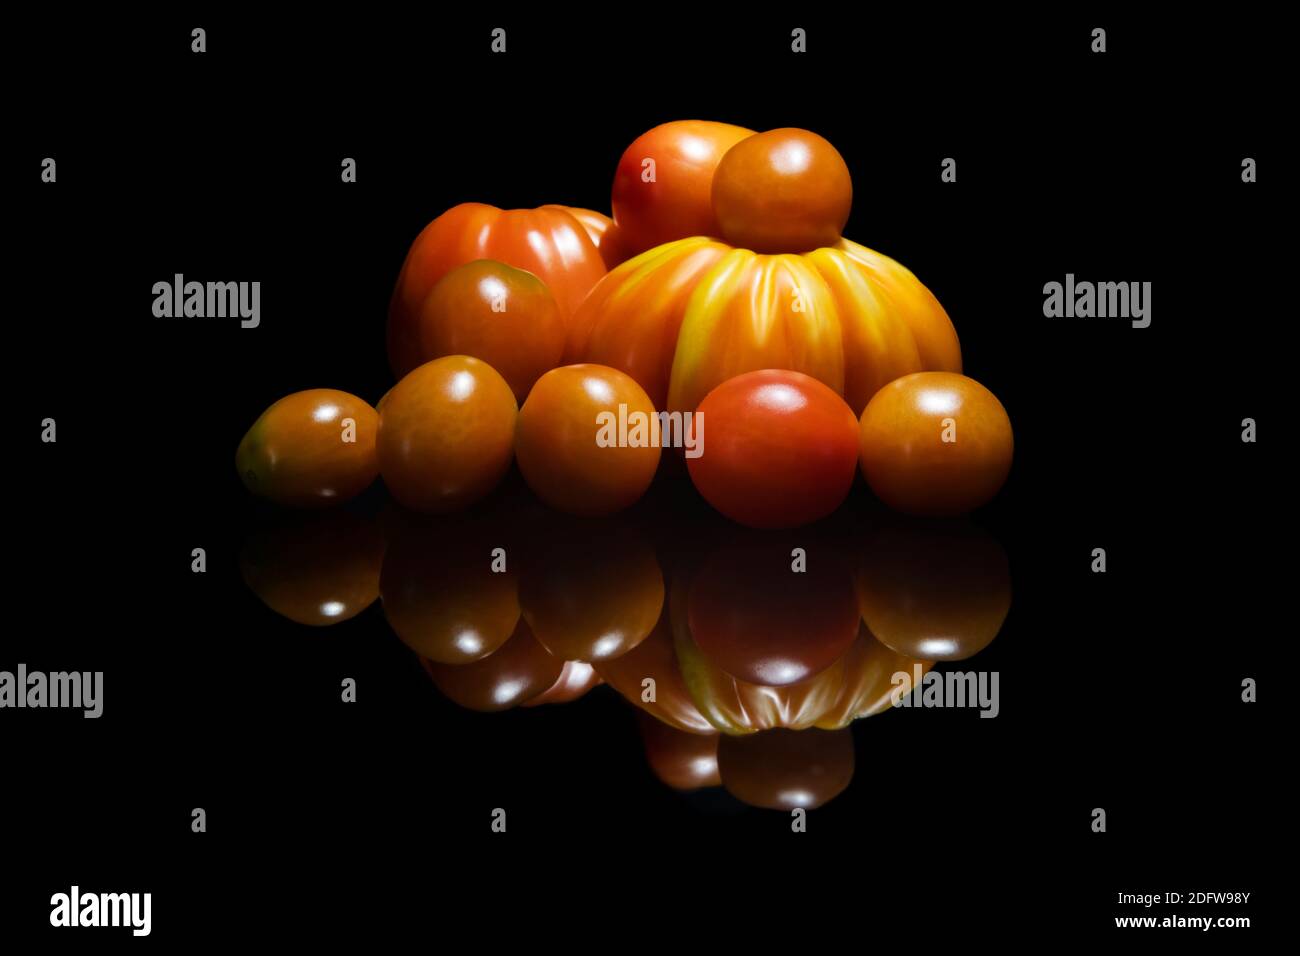 Different kinds of tomatoes piled up under lowlight Stock Photo